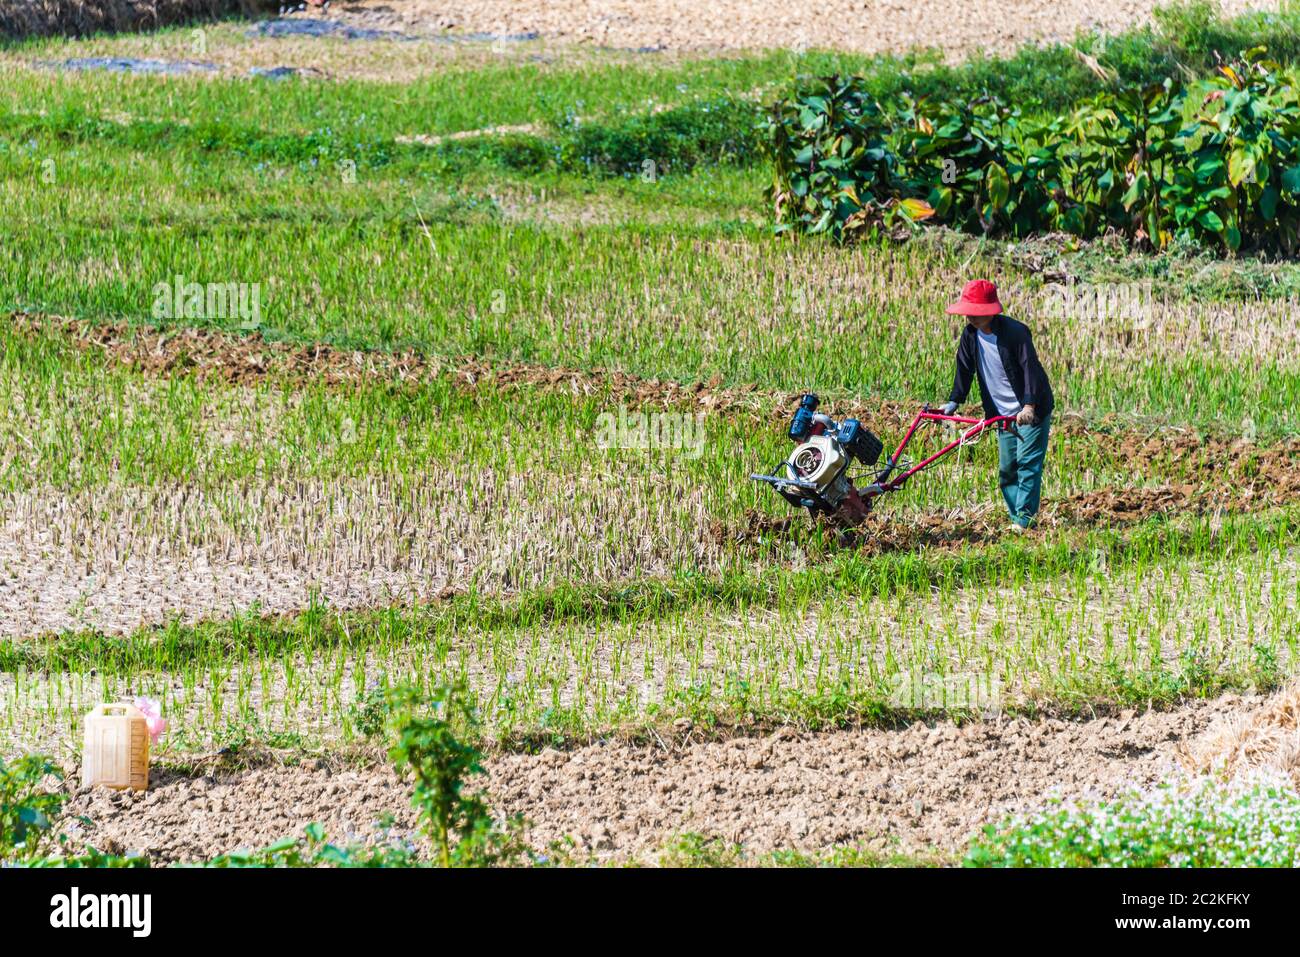 Self-sufficient labor-intensive farming in Ha Giang province, Vietnam.Traditional sustainable agriculture. Stock Photo